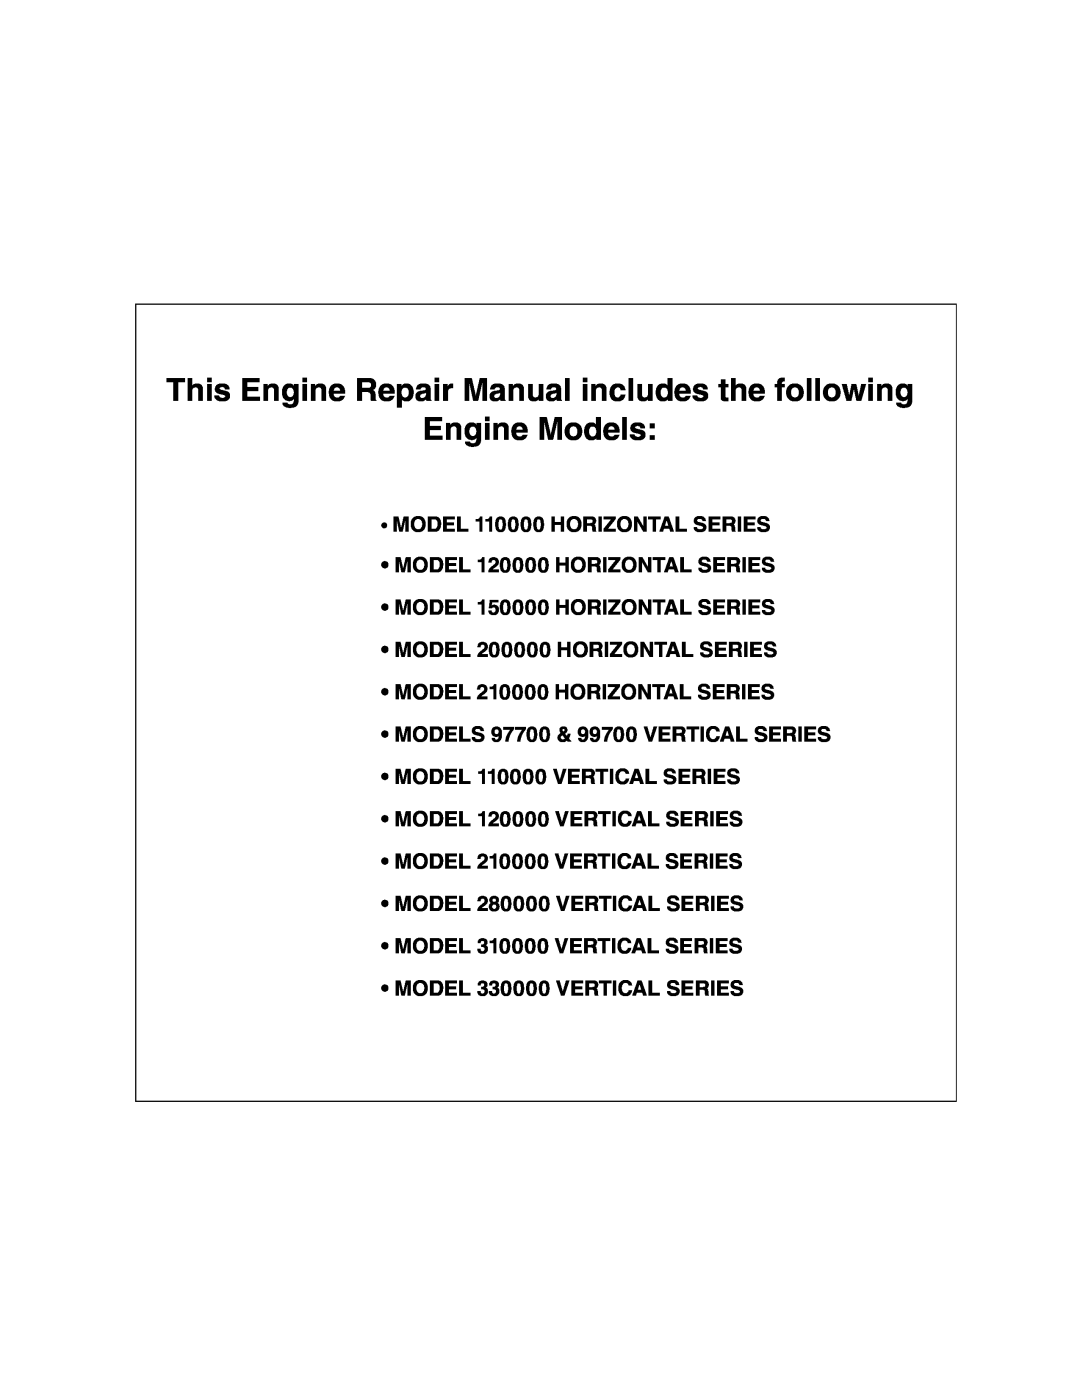 Briggs & Stratton 276535, 271172, 270962, CE8069, 273521 manual This Engine Repair Manual includes the following, Engine Models 